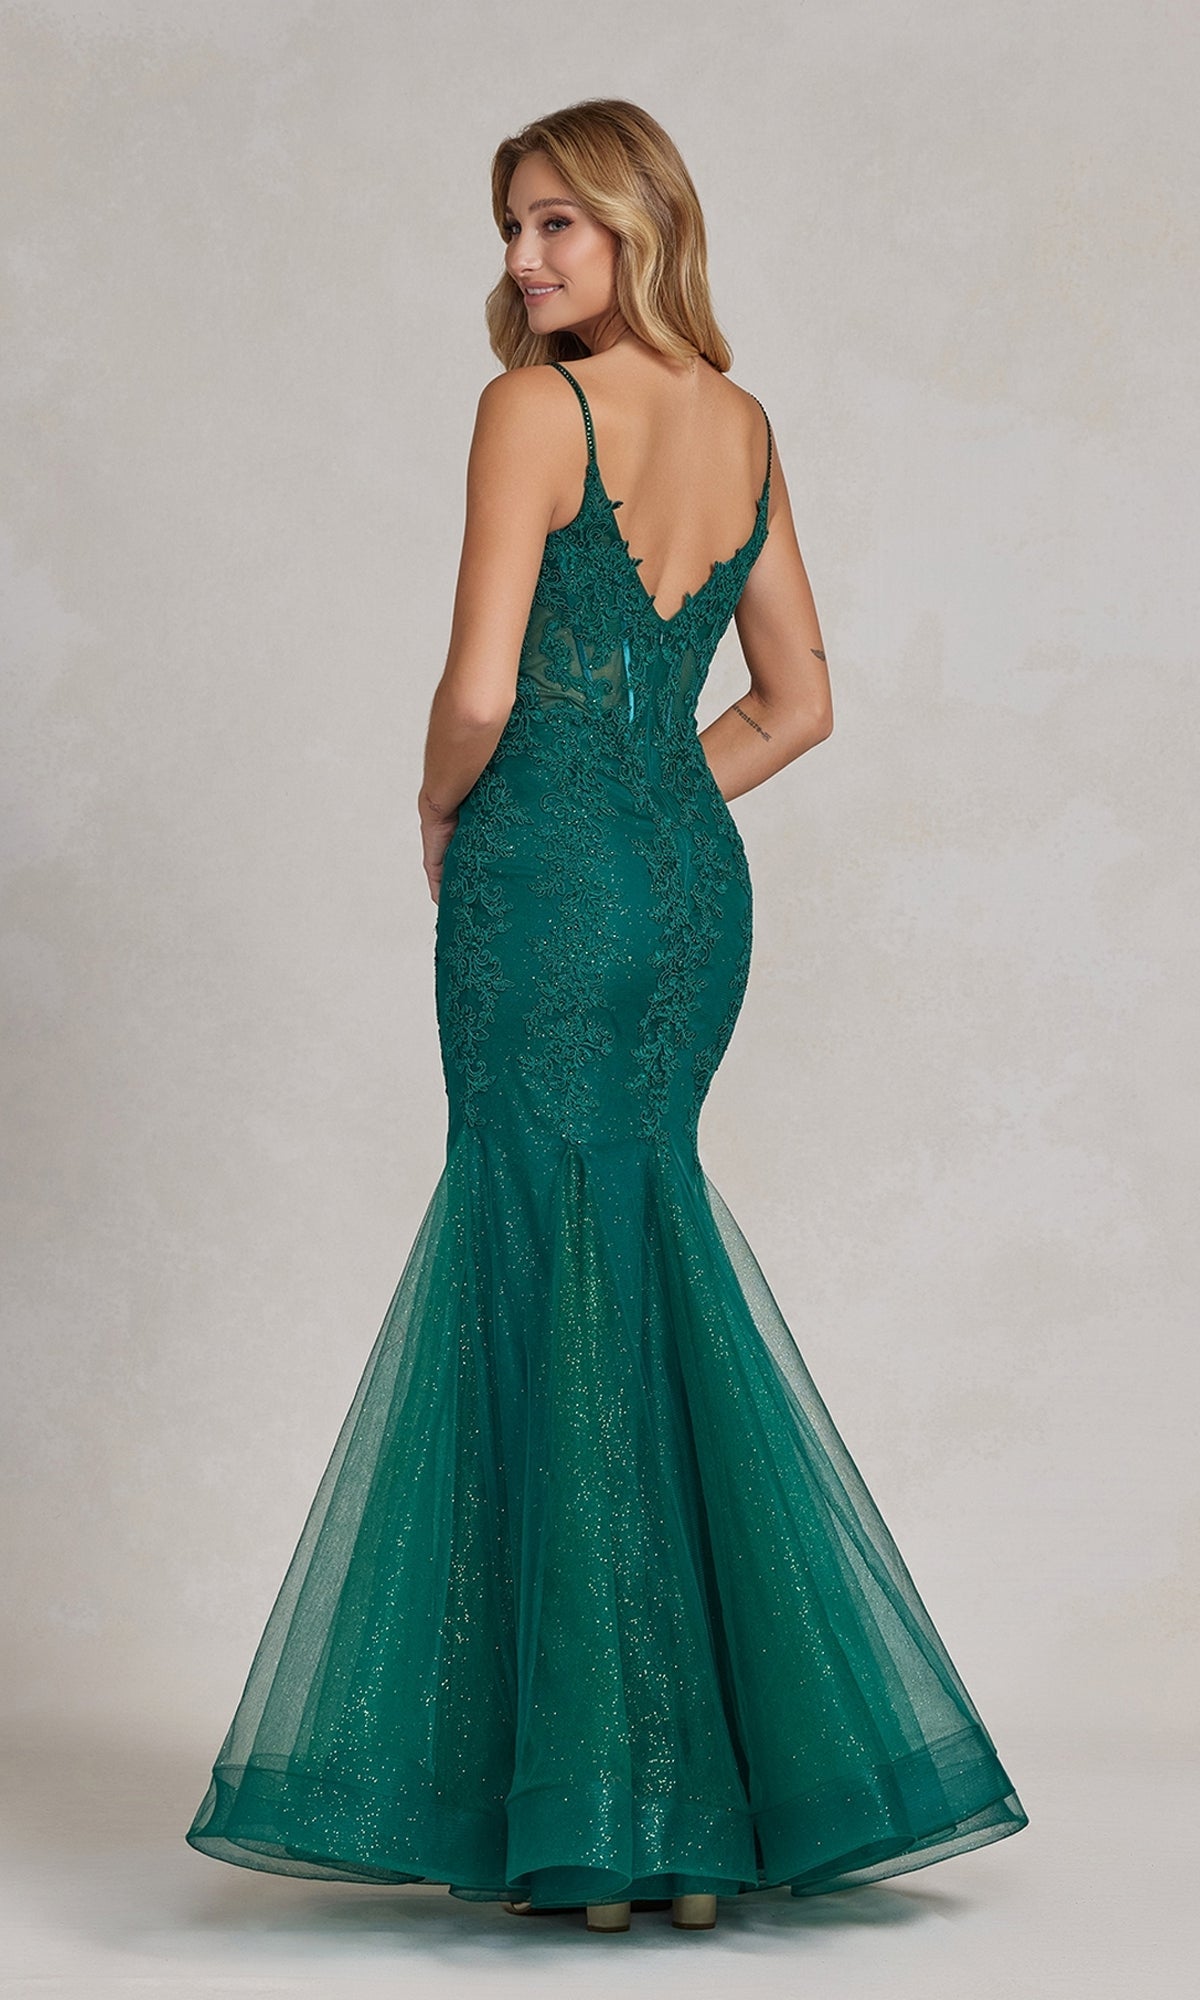  Sheer-Corset-Bodice Long Mermaid Prom Gown P1170